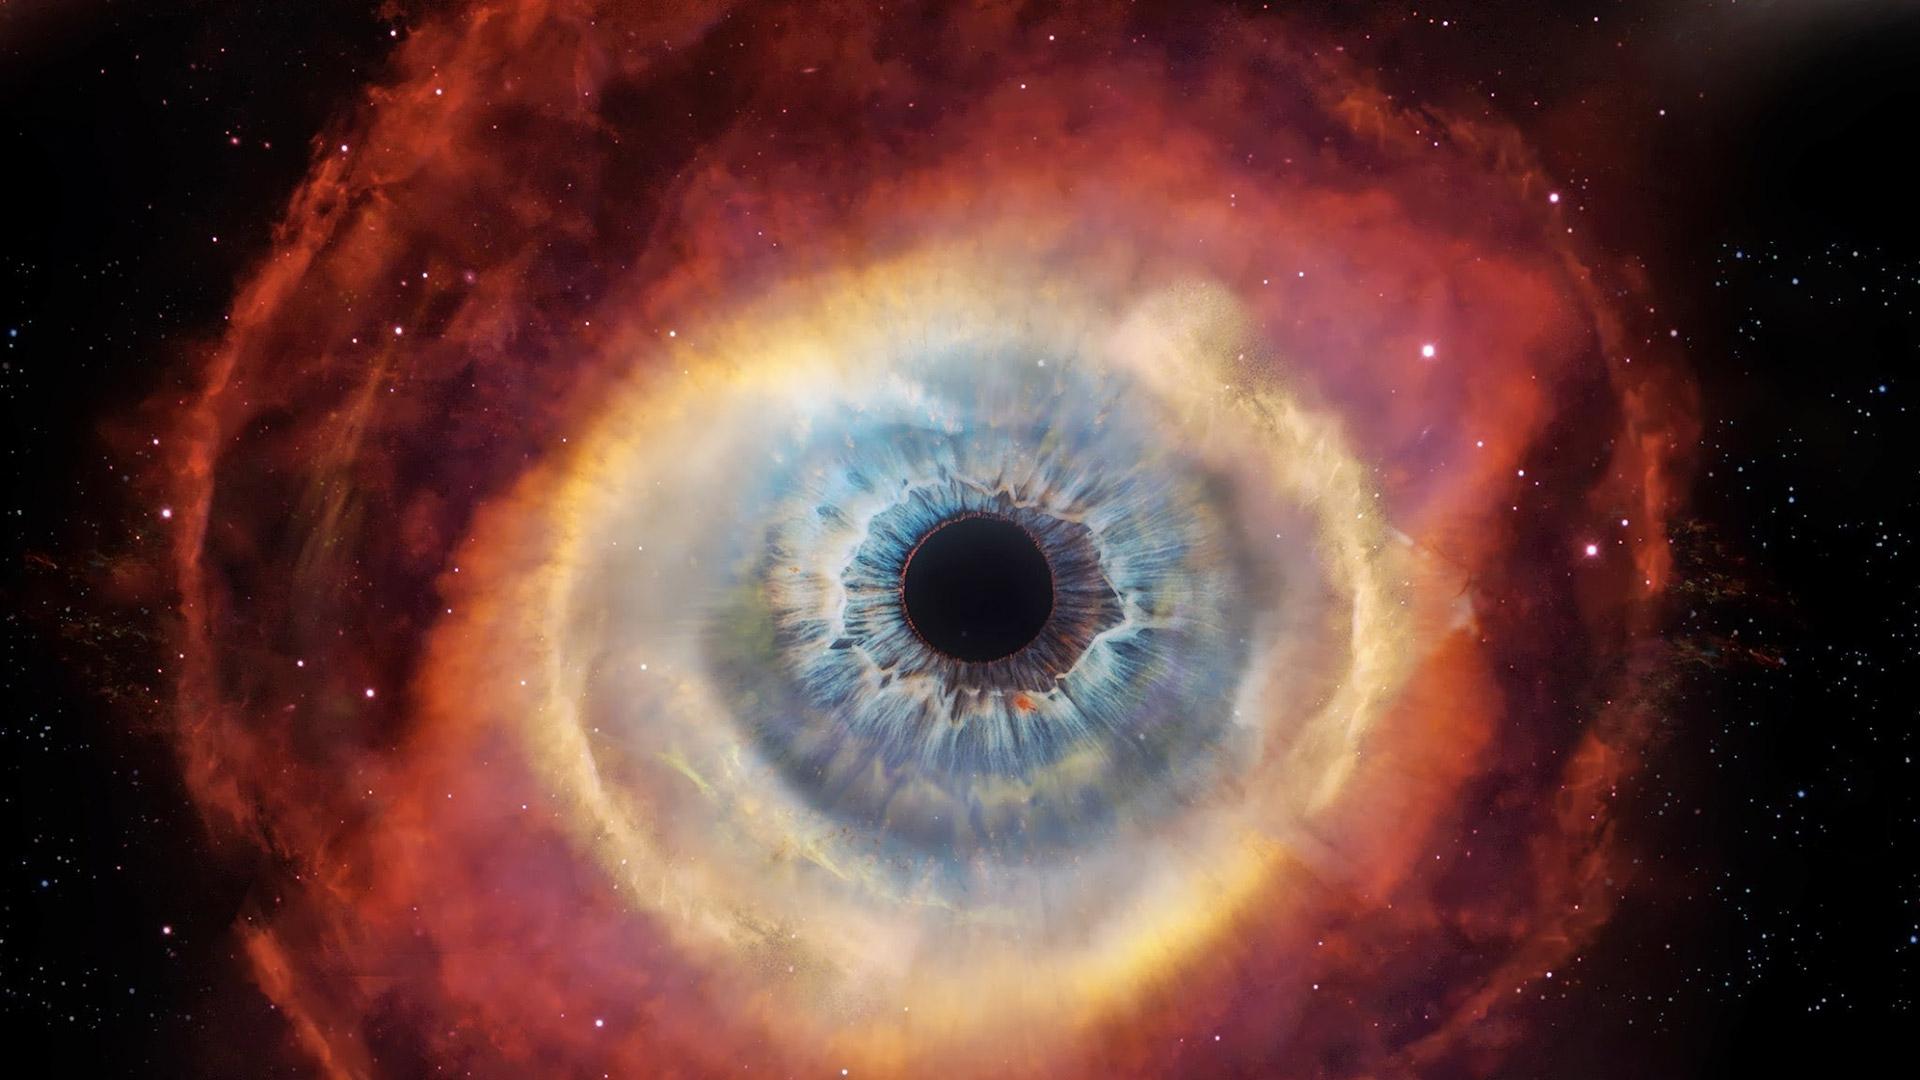 Cosmos: A Spacetime Odyssey Wallpaper (1920×1080)